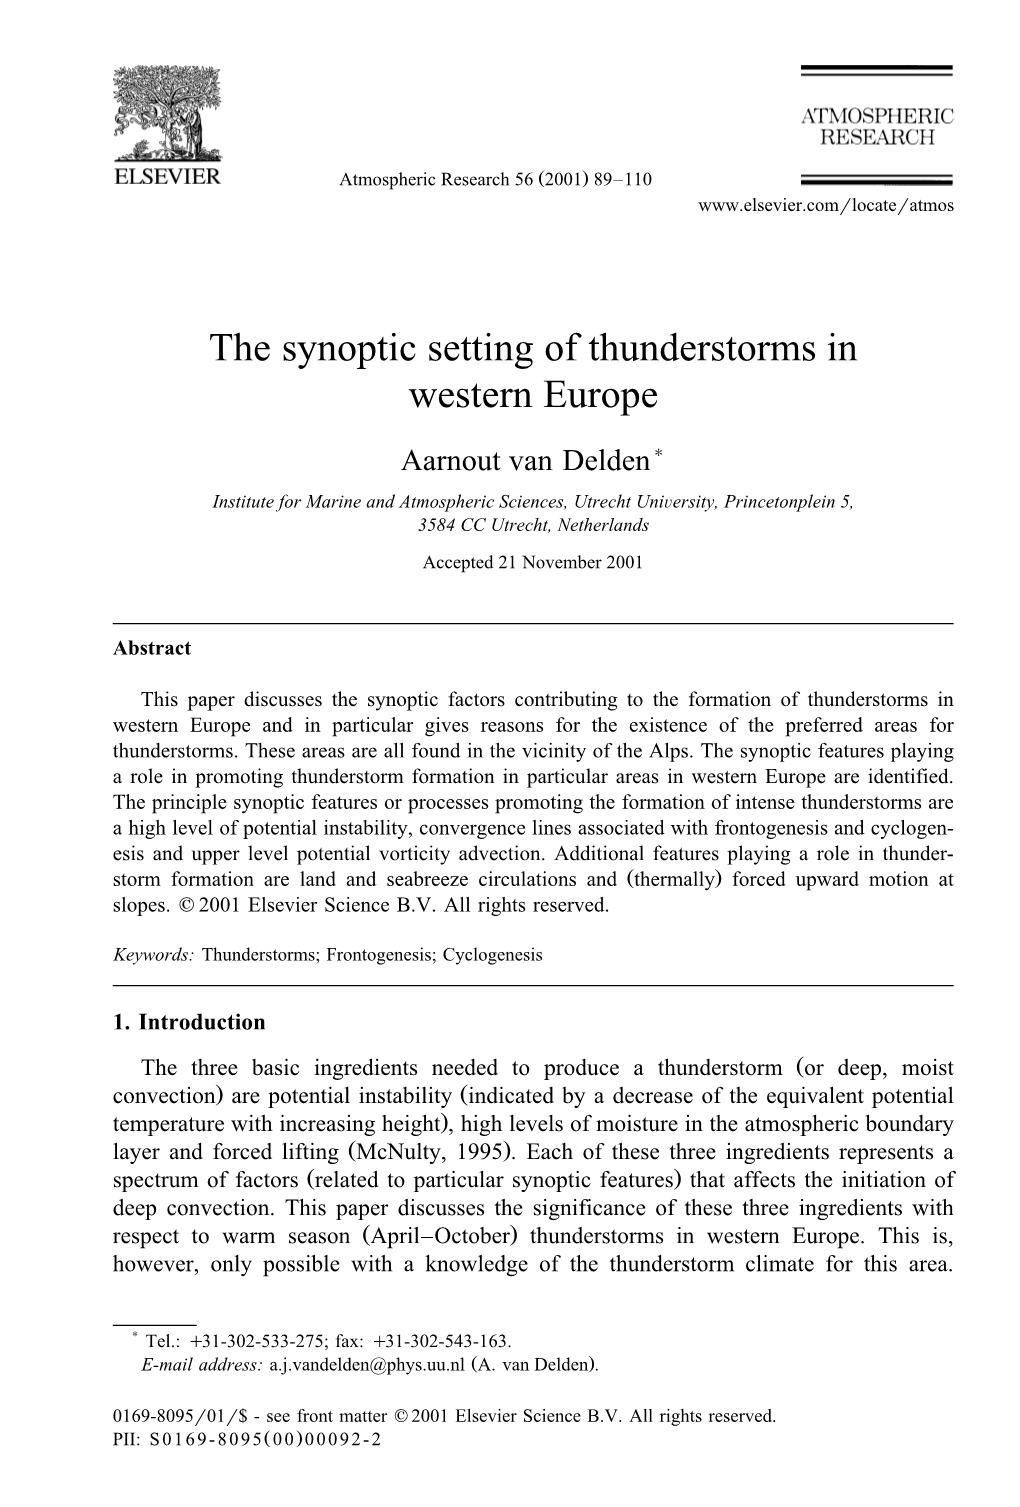 The Synoptic Setting of Thunderstorms in Western Europe